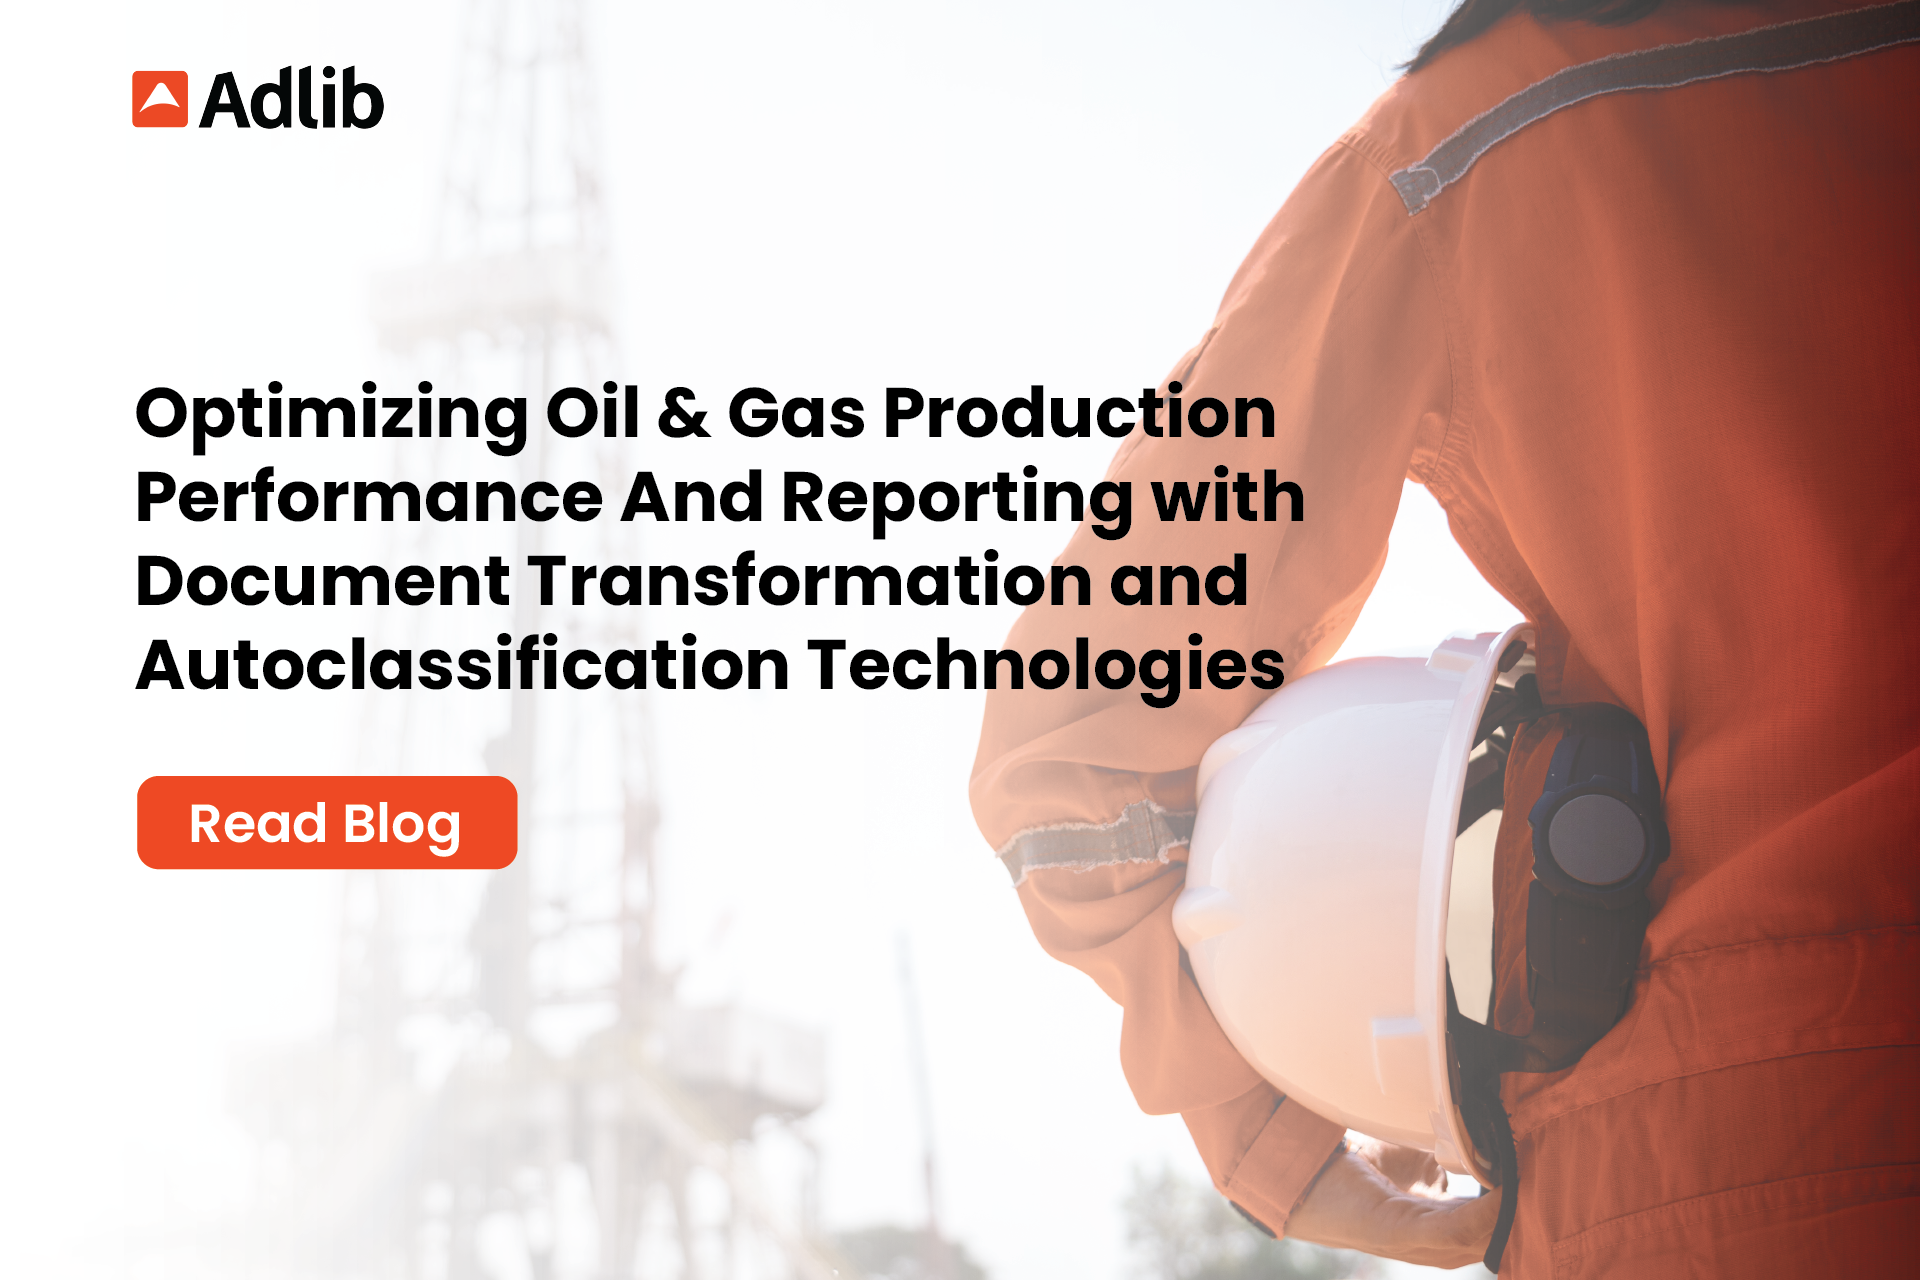 Optimizing Oil & Gas Production Performance And Reporting with Document Transformation and Autoclassification Technologies Featured Image